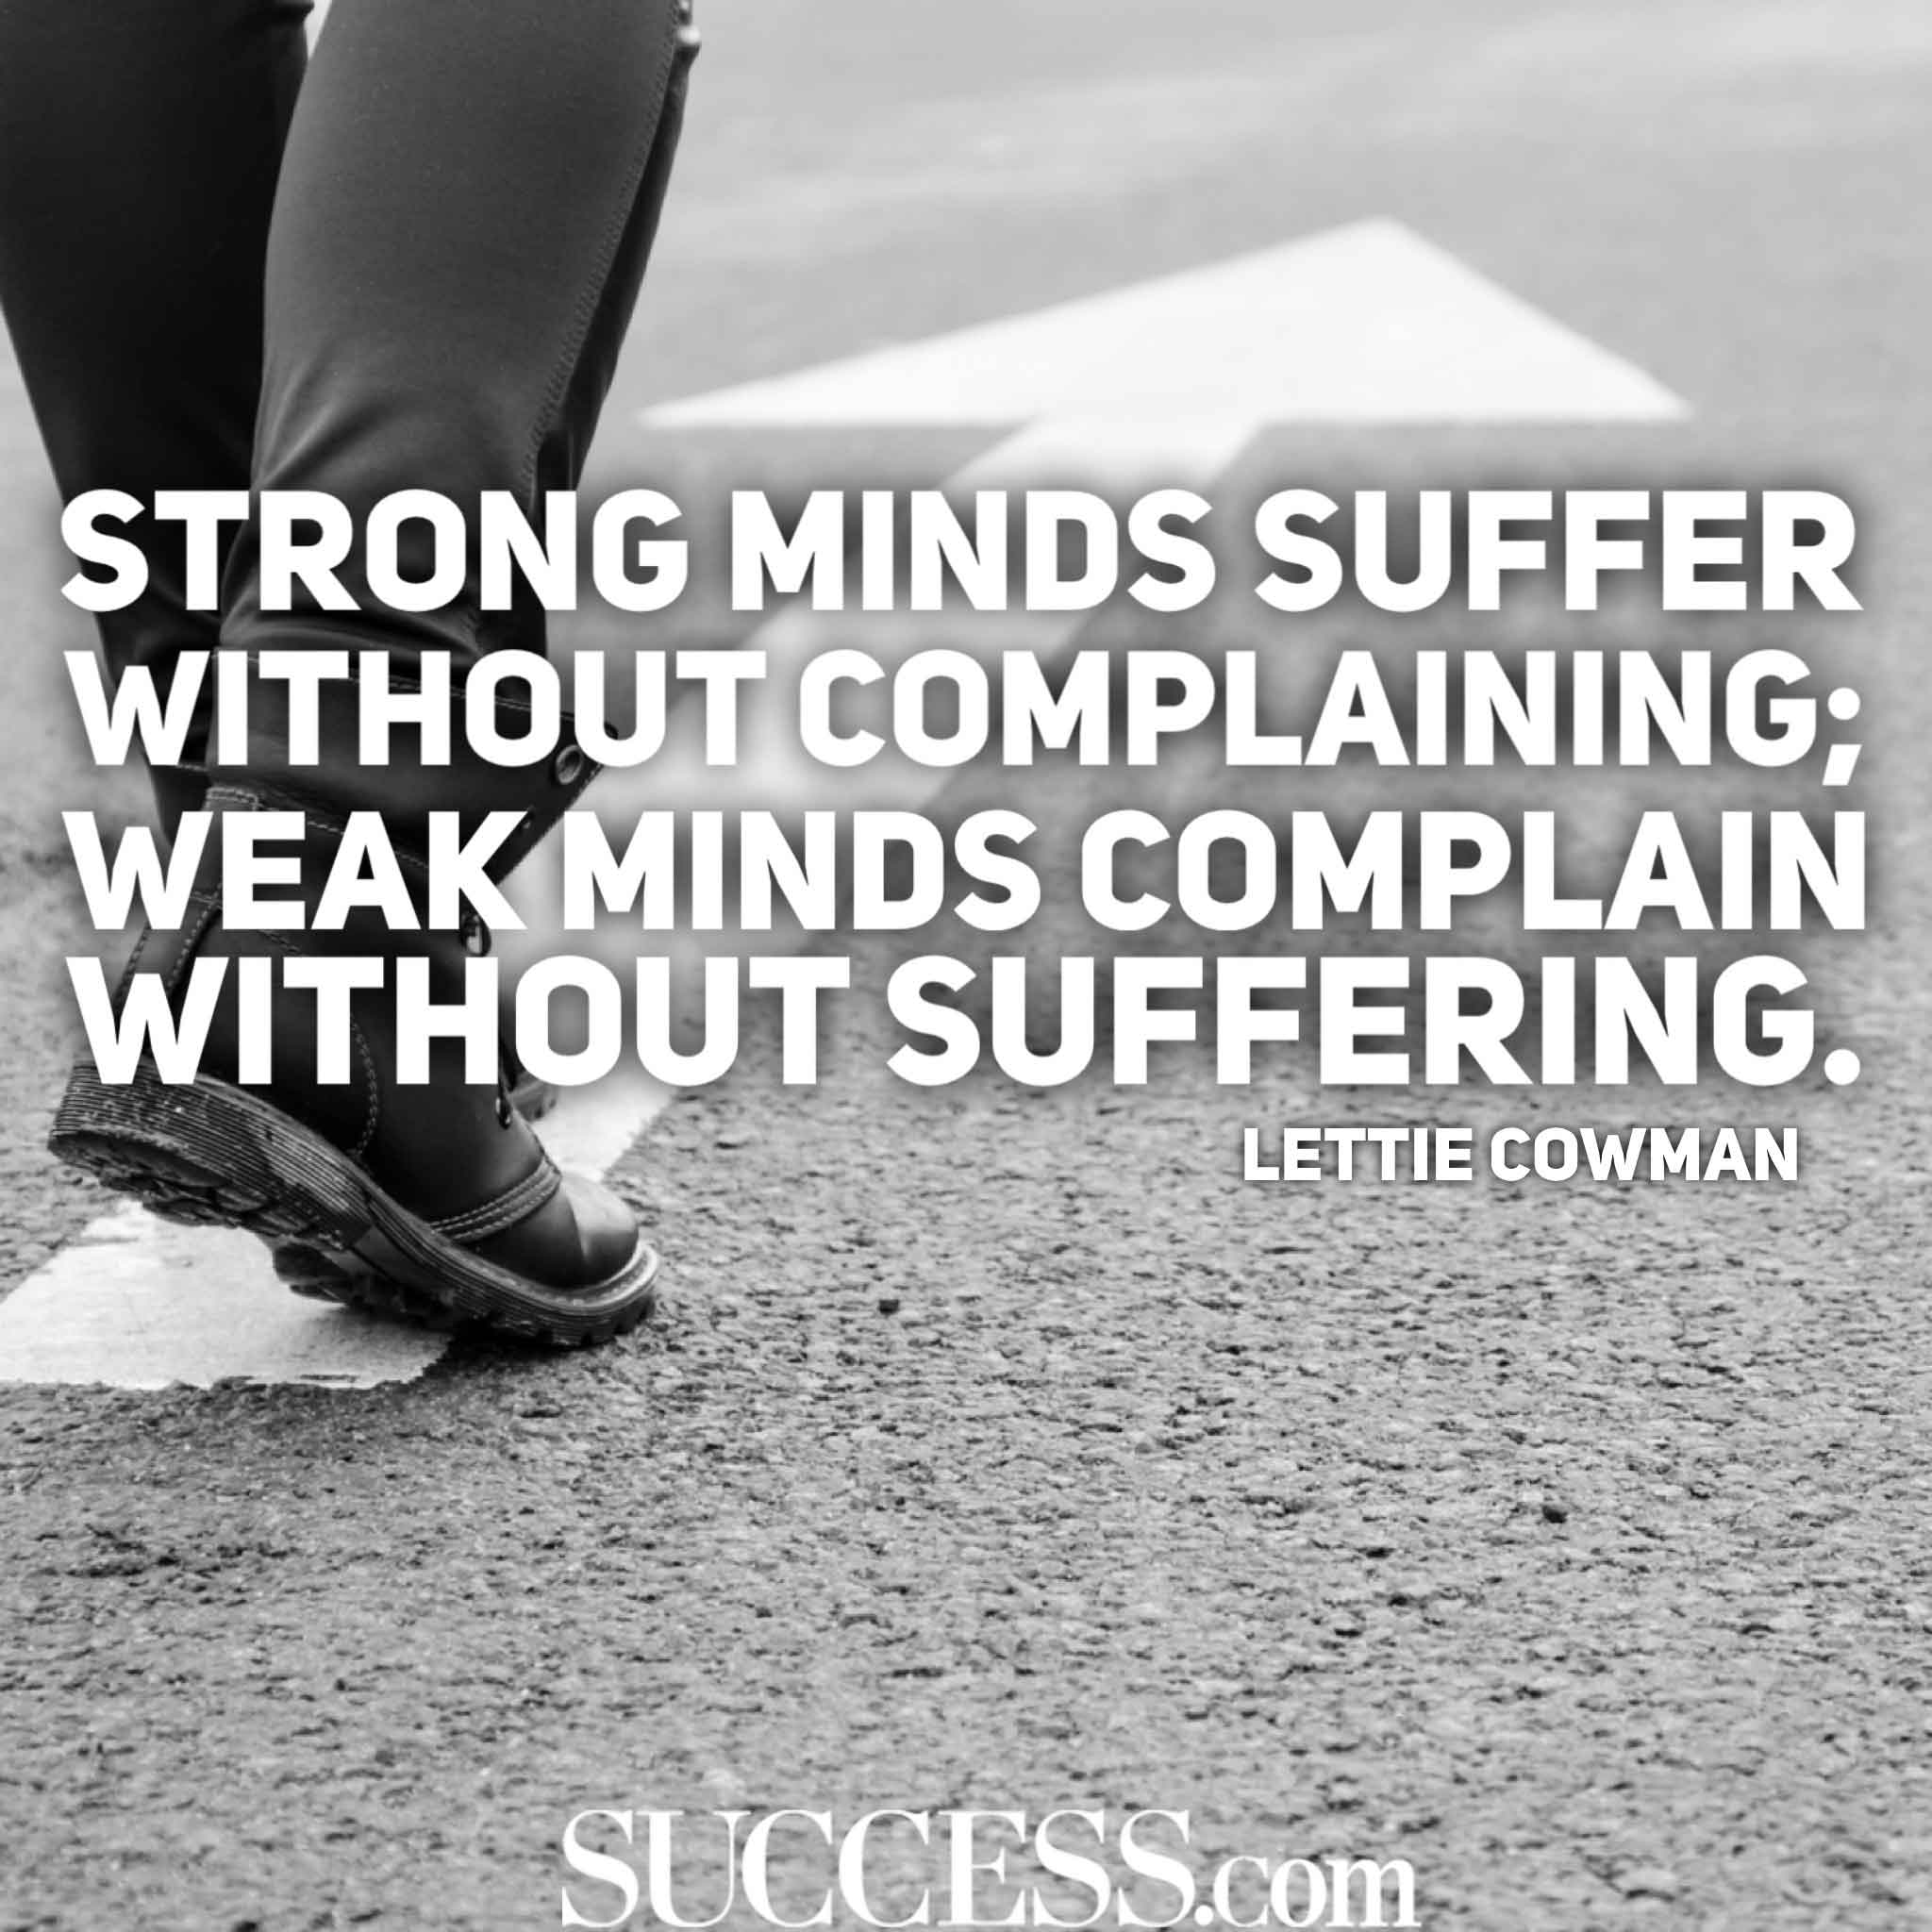 strong minds suffer without complaining weak minds complain without suffering. lettie cowman